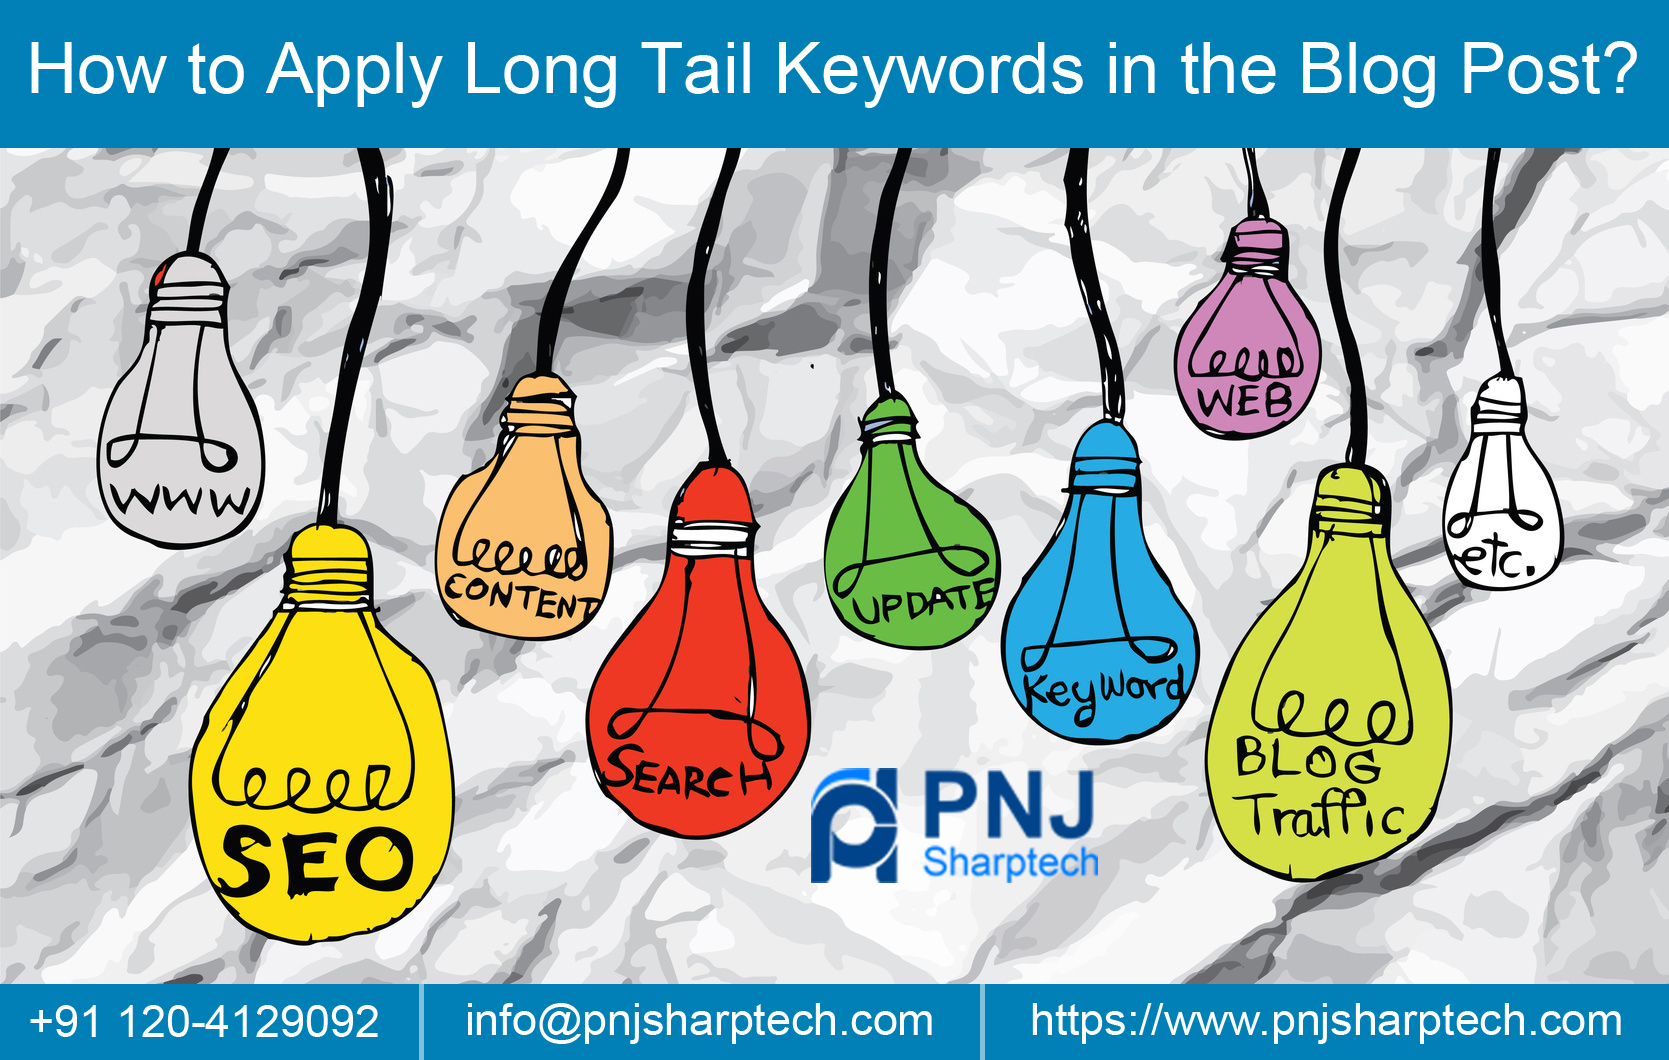 How to Apply Long Tail Keywords